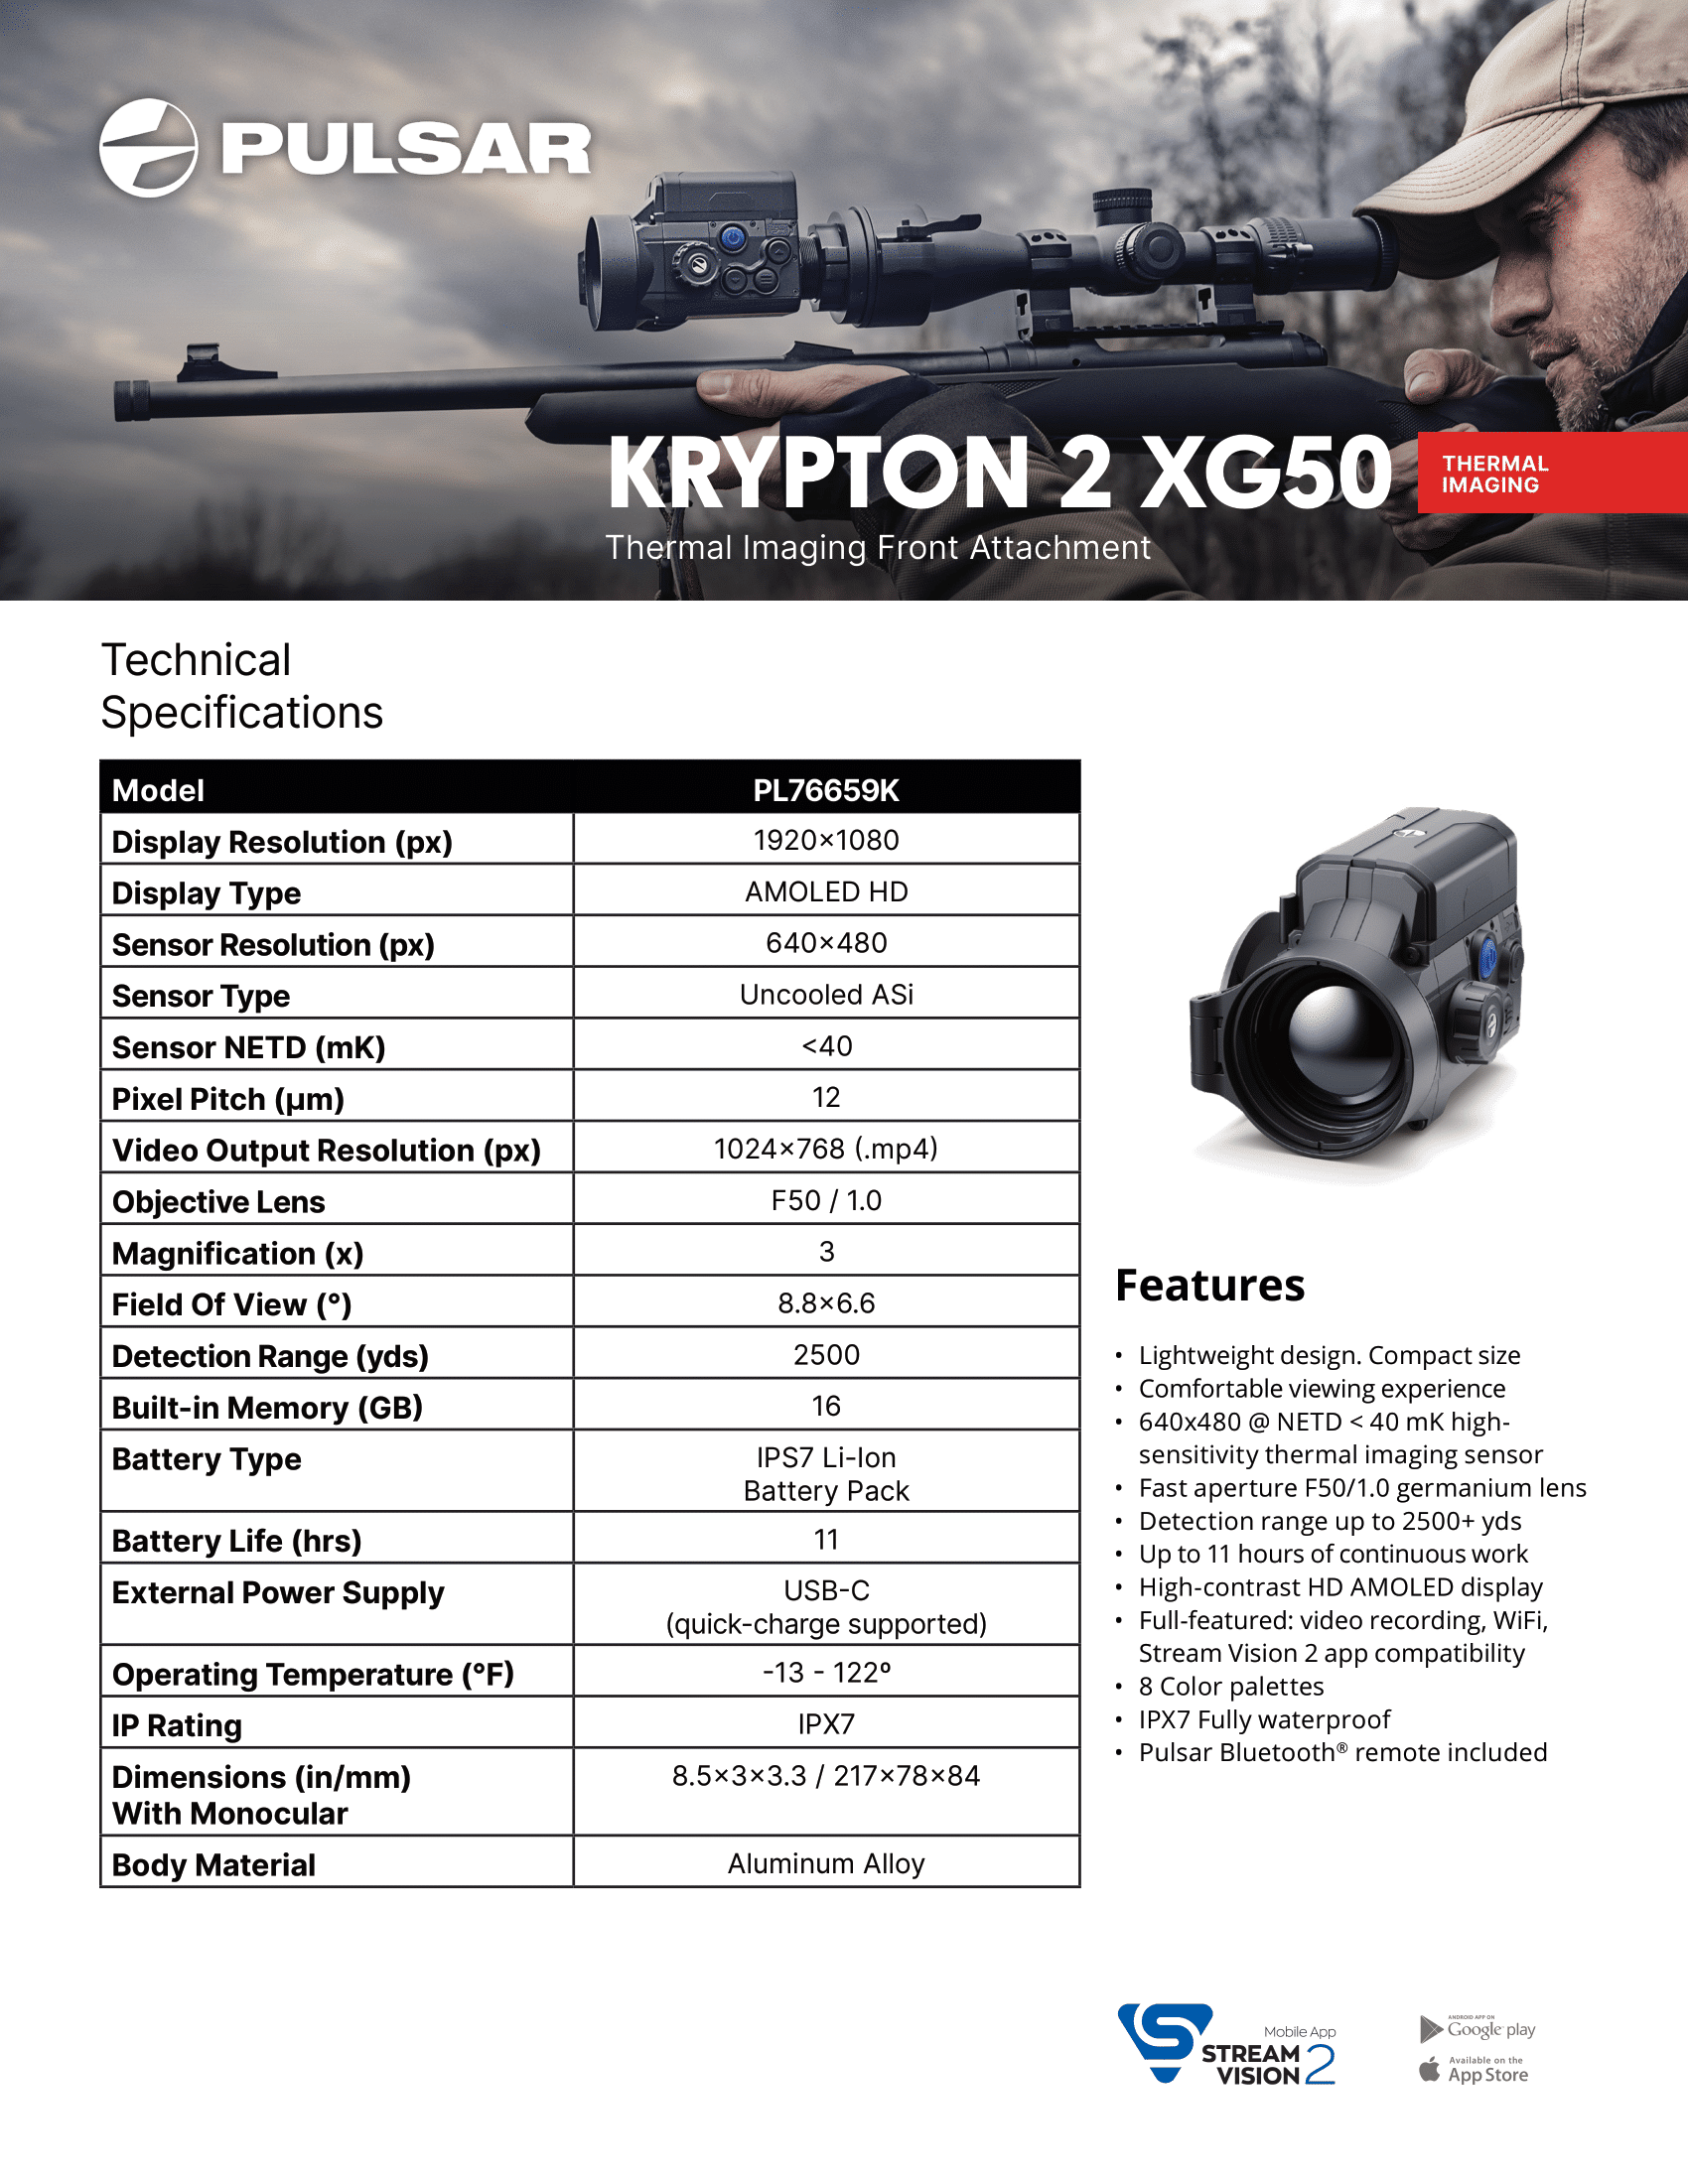 Pulsar Krypton 2 FXG50 Thermal Imaging Front Attachment Kit Specifications